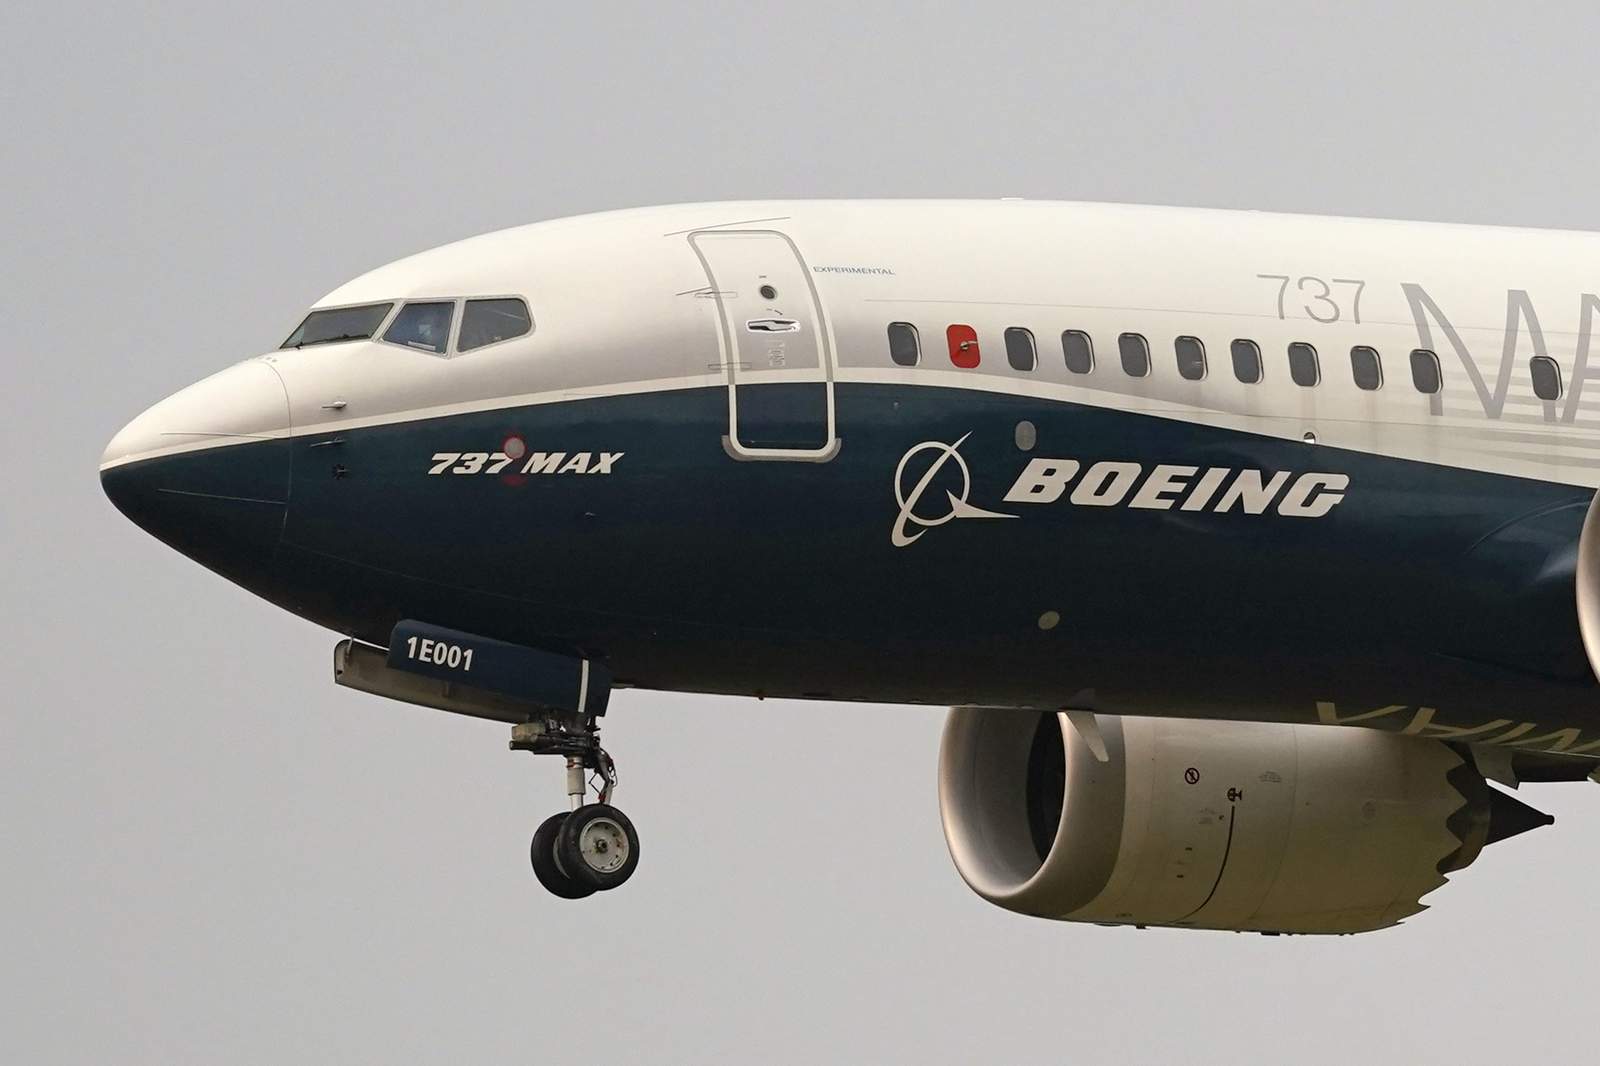 Airlines pull Boeing Max jets to inspect electrical systems